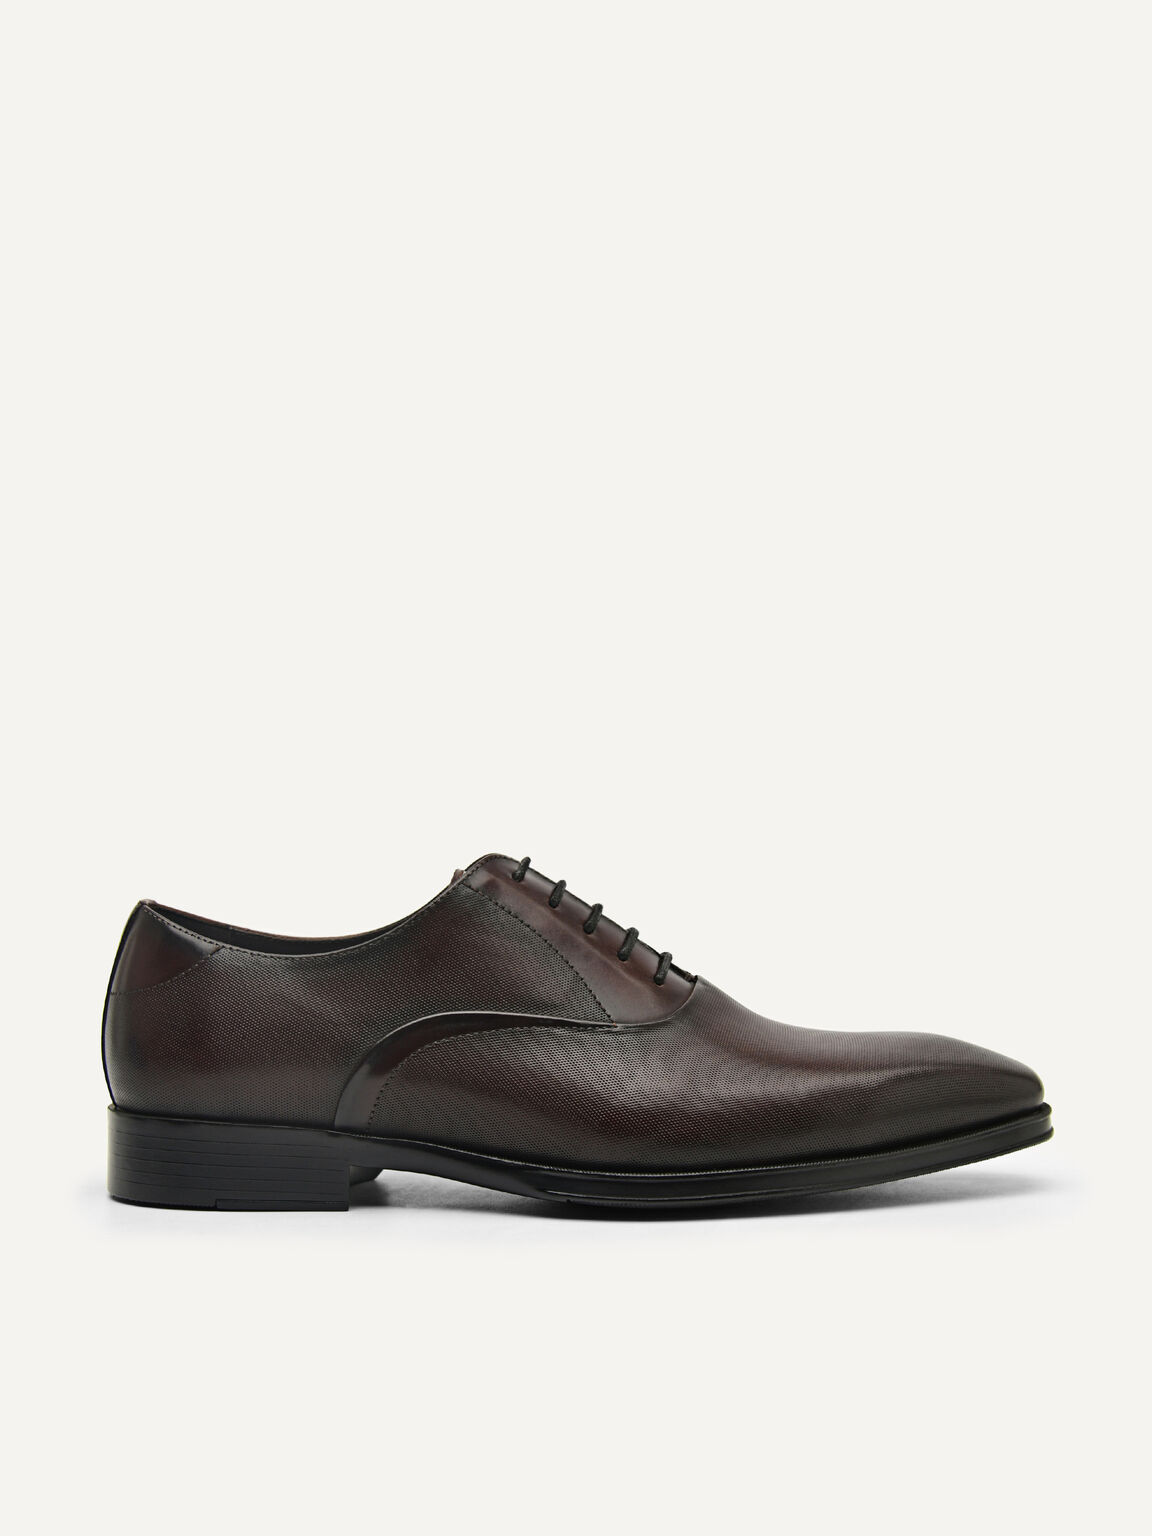 Holly Leather Oxford Shoes, Dark Brown